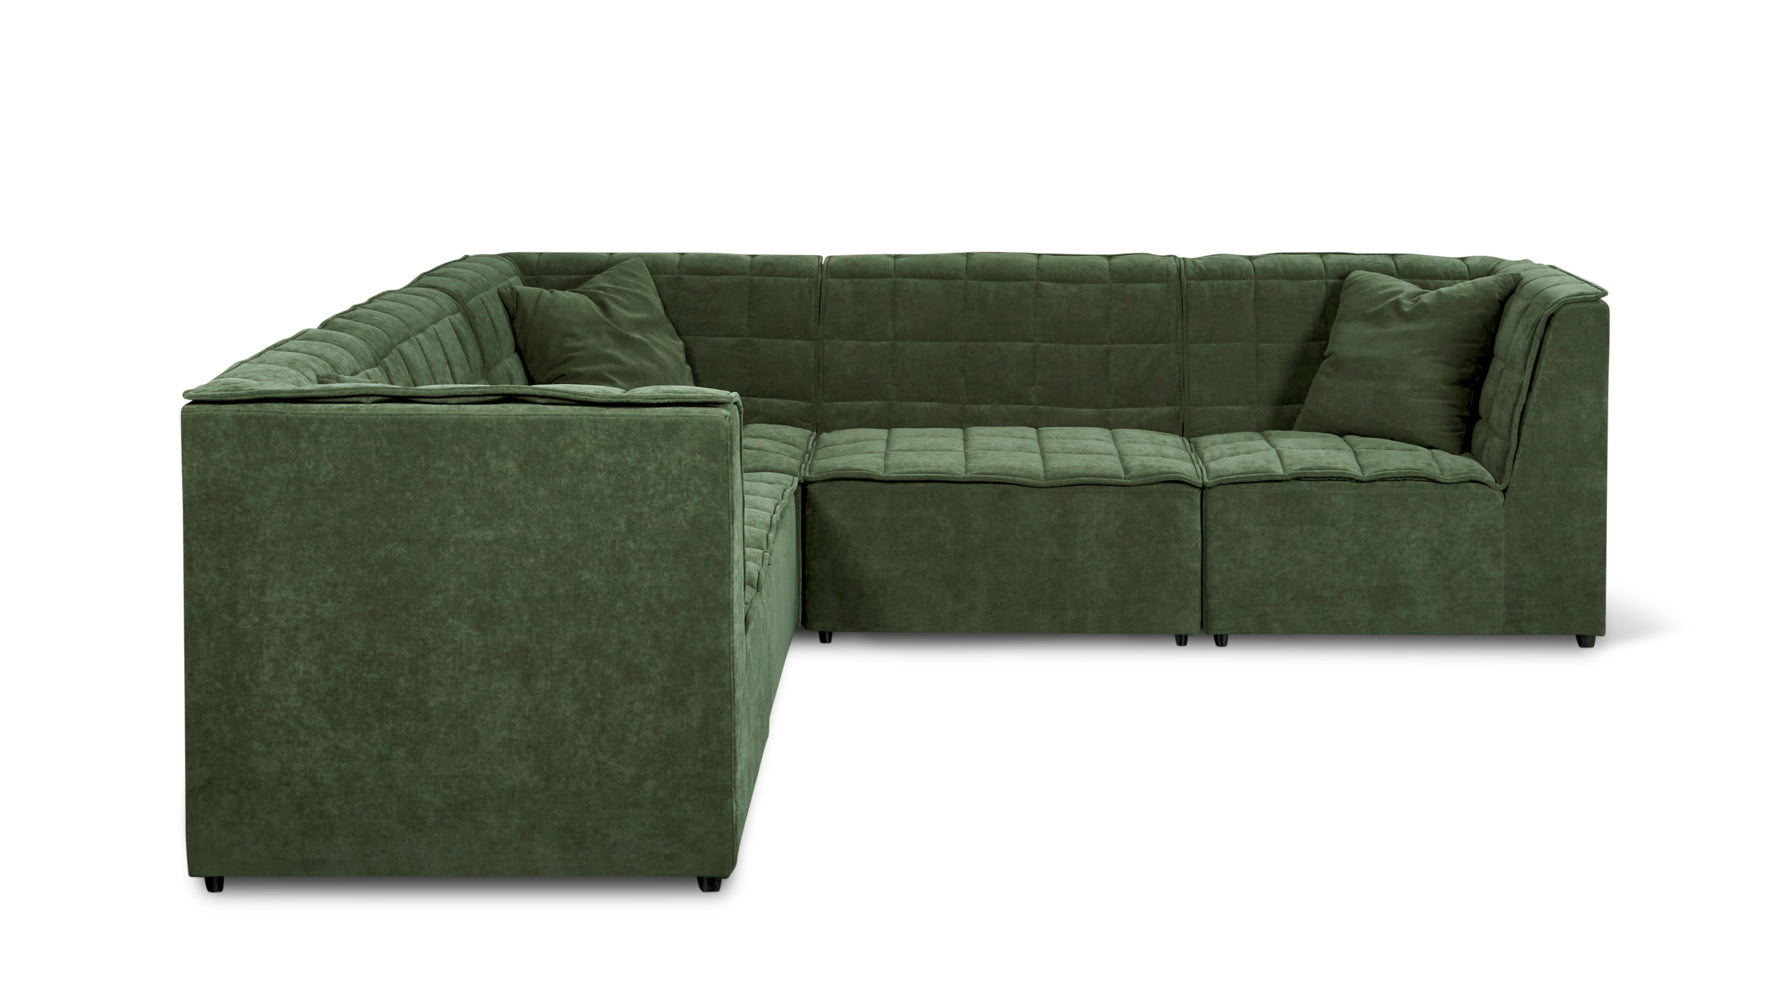 Quilt 5-Piece Modular Sectional Closed, Moss - Image 1